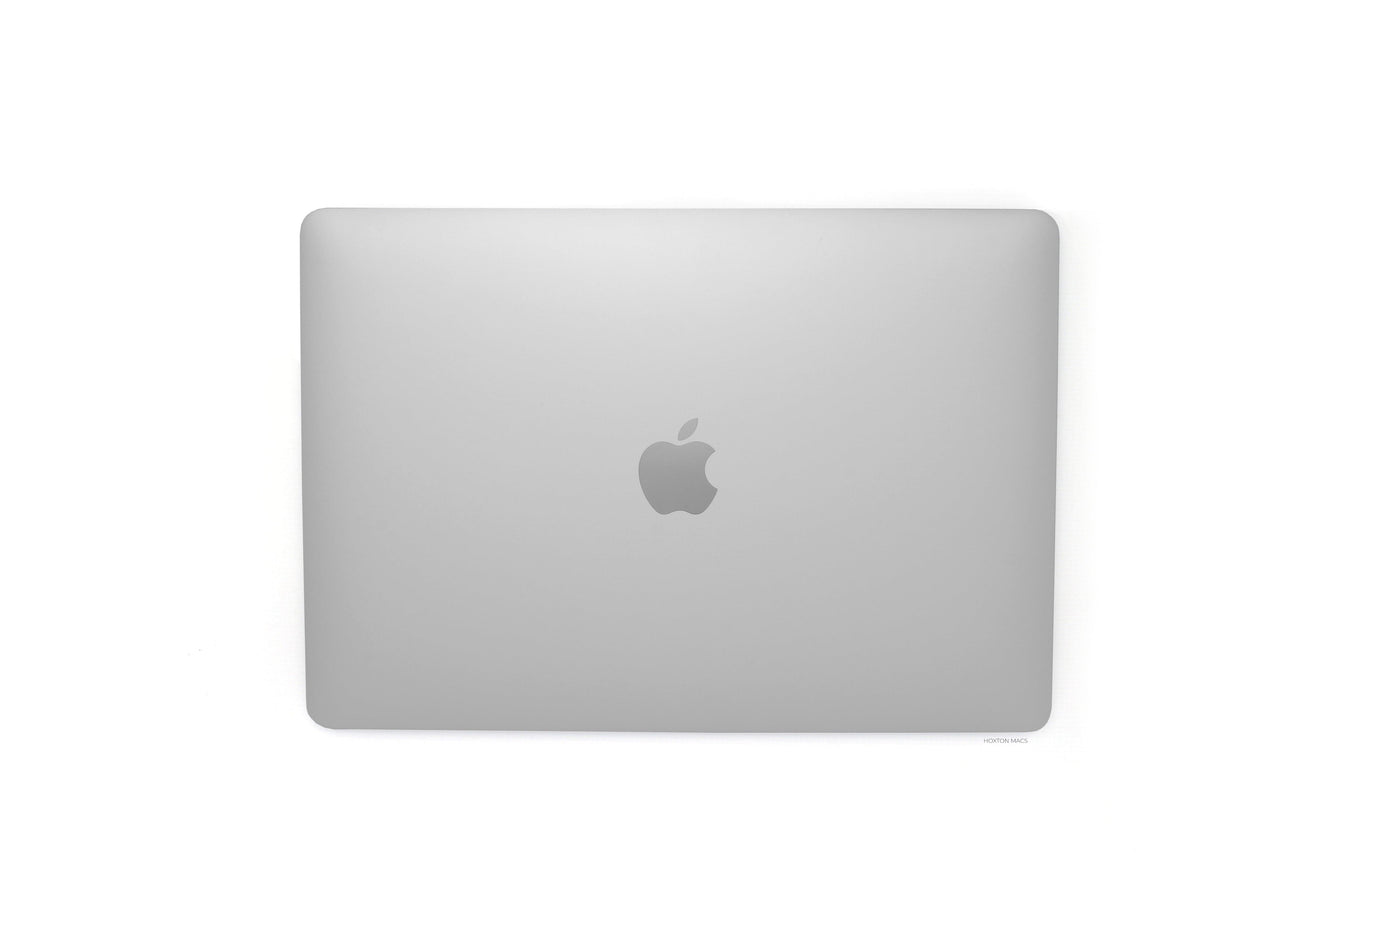 Apple MacBook Air 13-inch MacBook Air 13-inch Core i7 1.2GHz (Silver, 2020) - Excellent